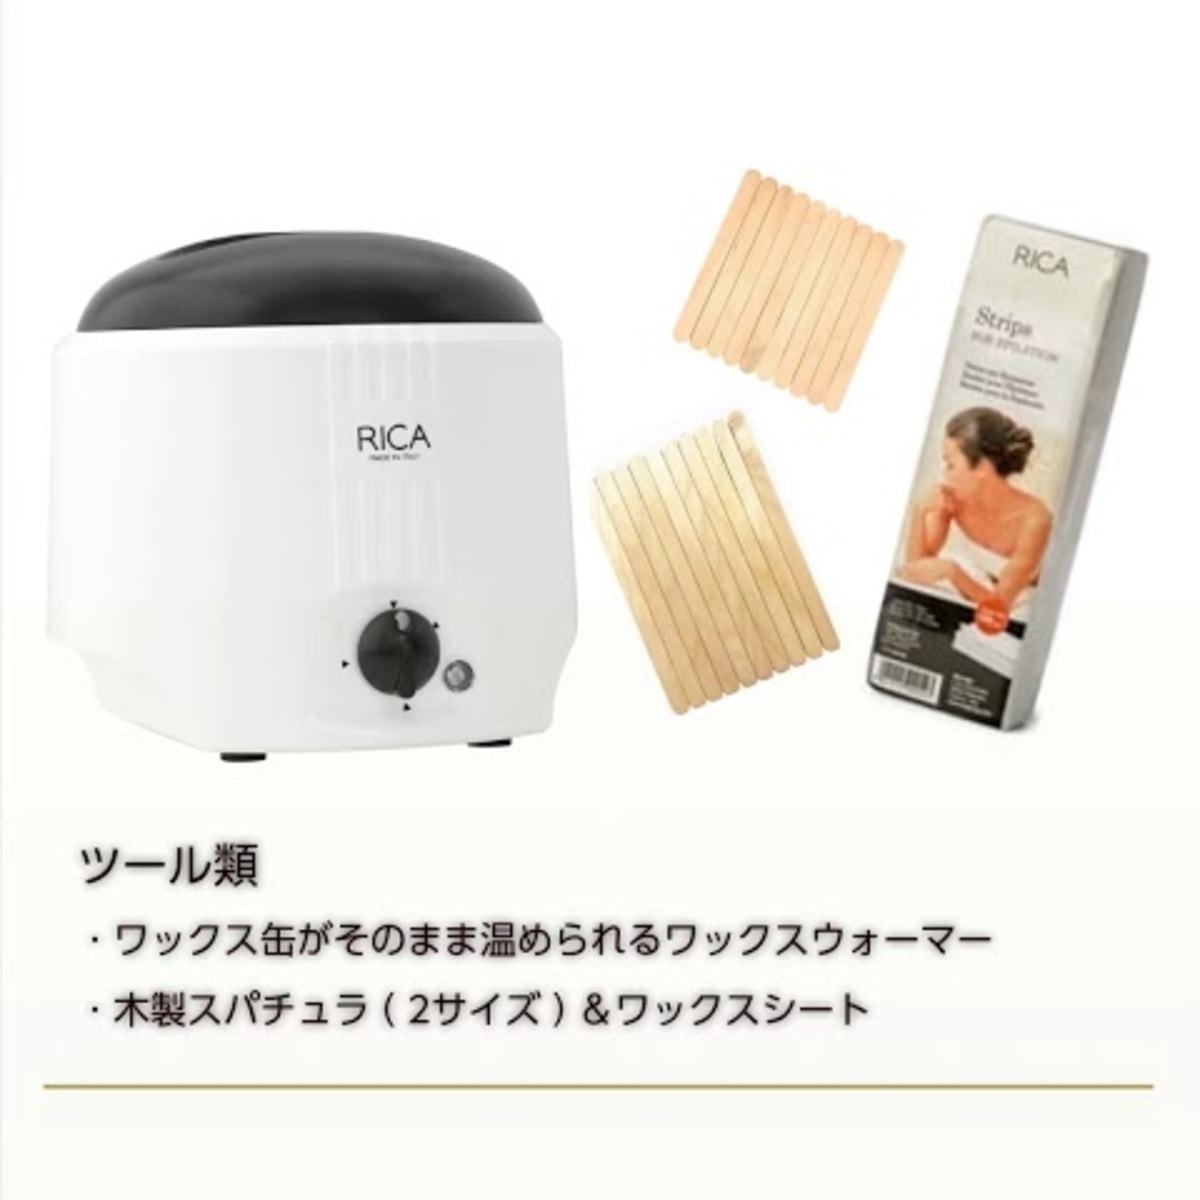 RICA WAX ウォーマー付 初回導入キット iconsolutions.com.ve